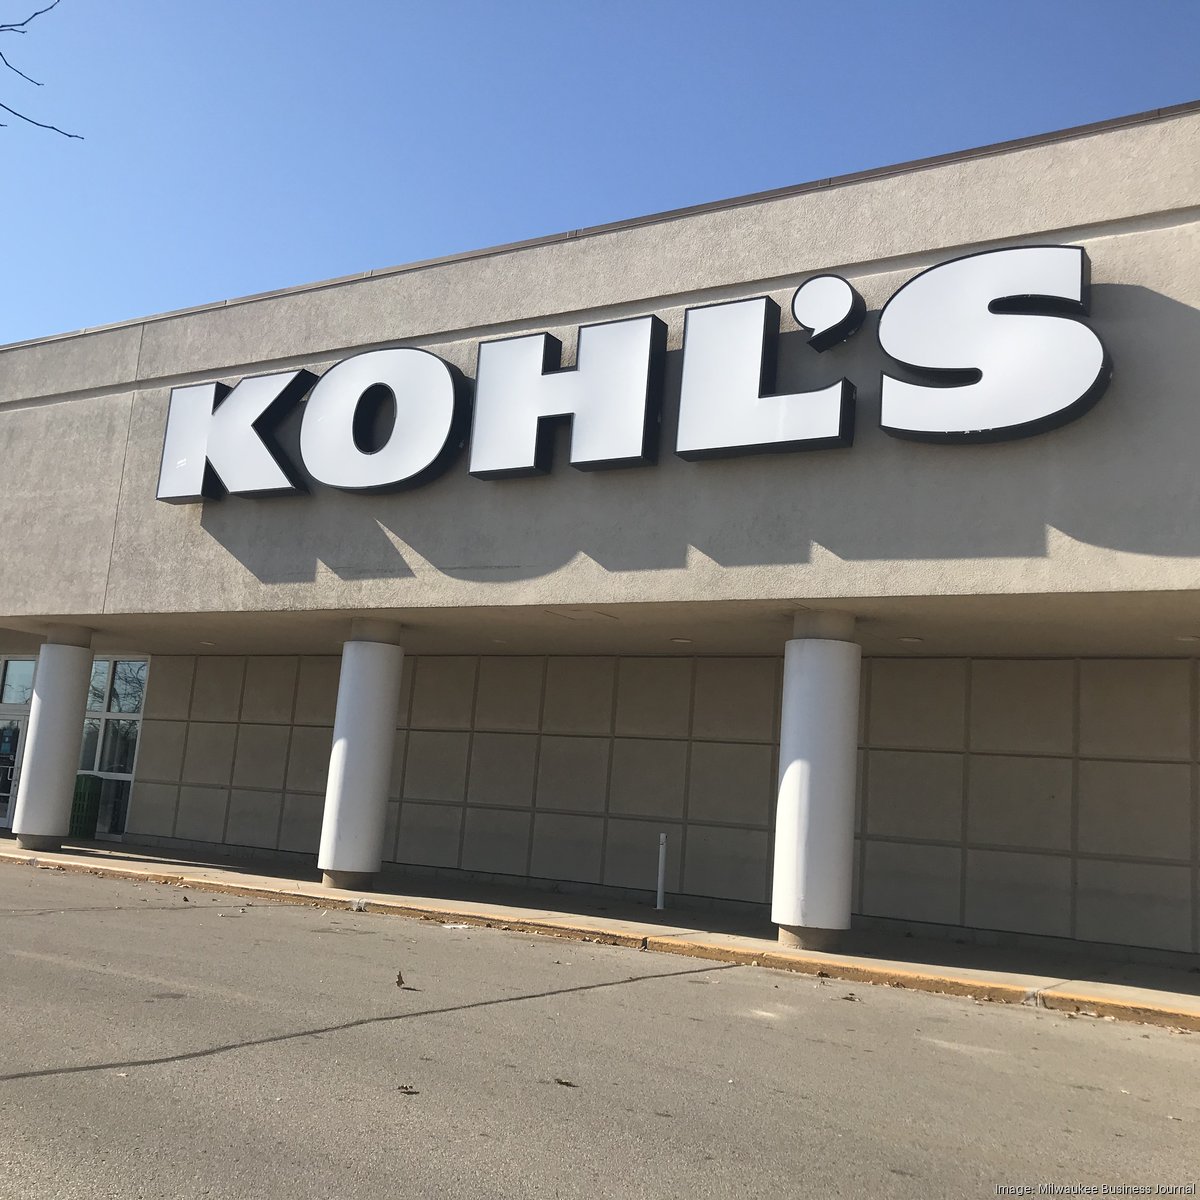 Is A Kohl's Sephora Shop Opening Near You In 2022? [Complete List]